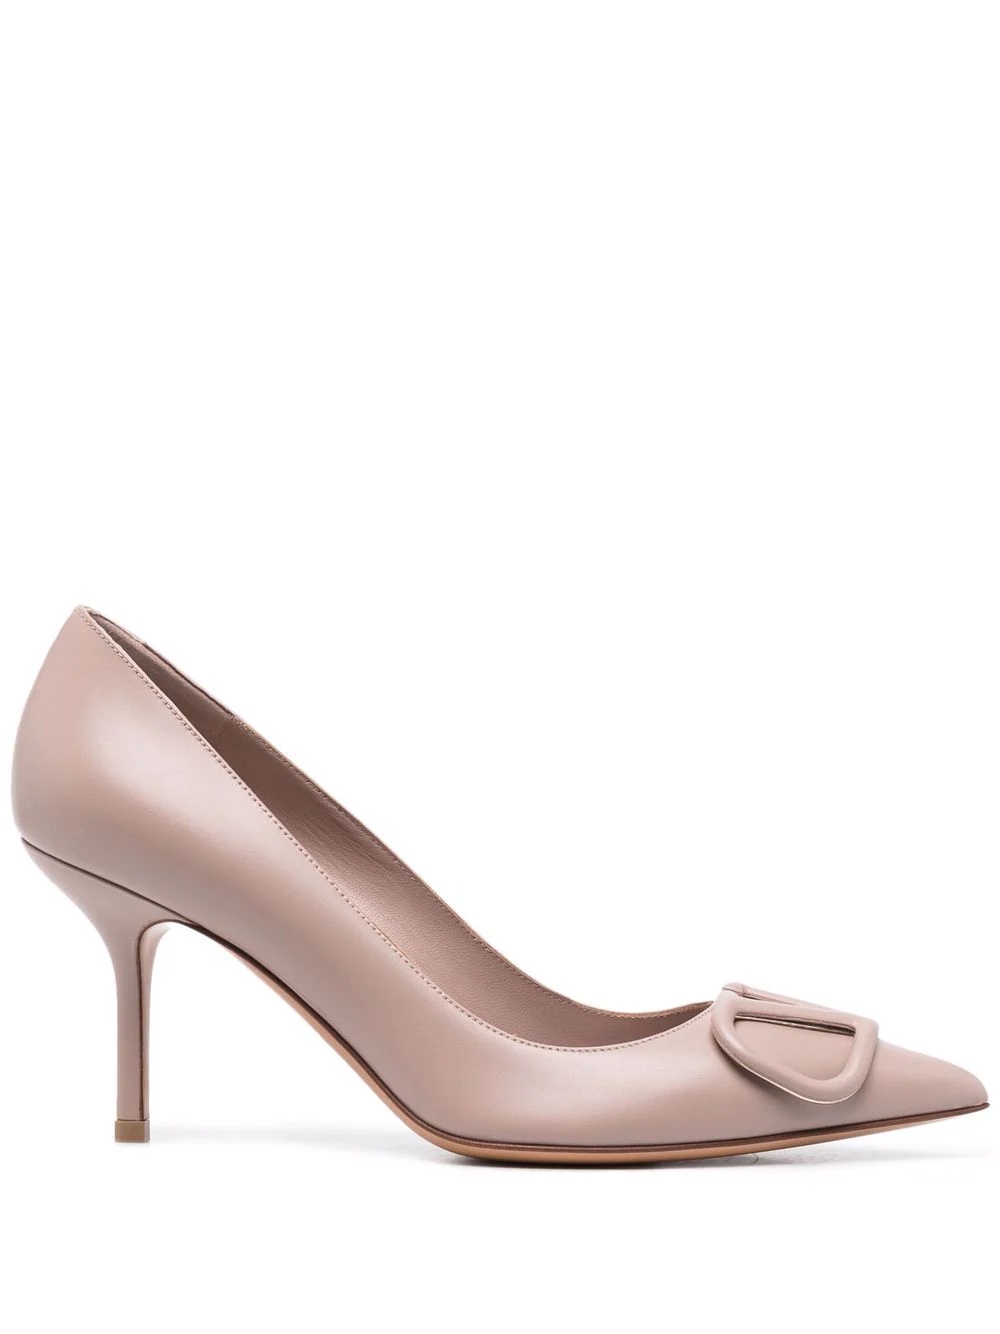 VLOGO Signature 90mm pointed pumps - 1